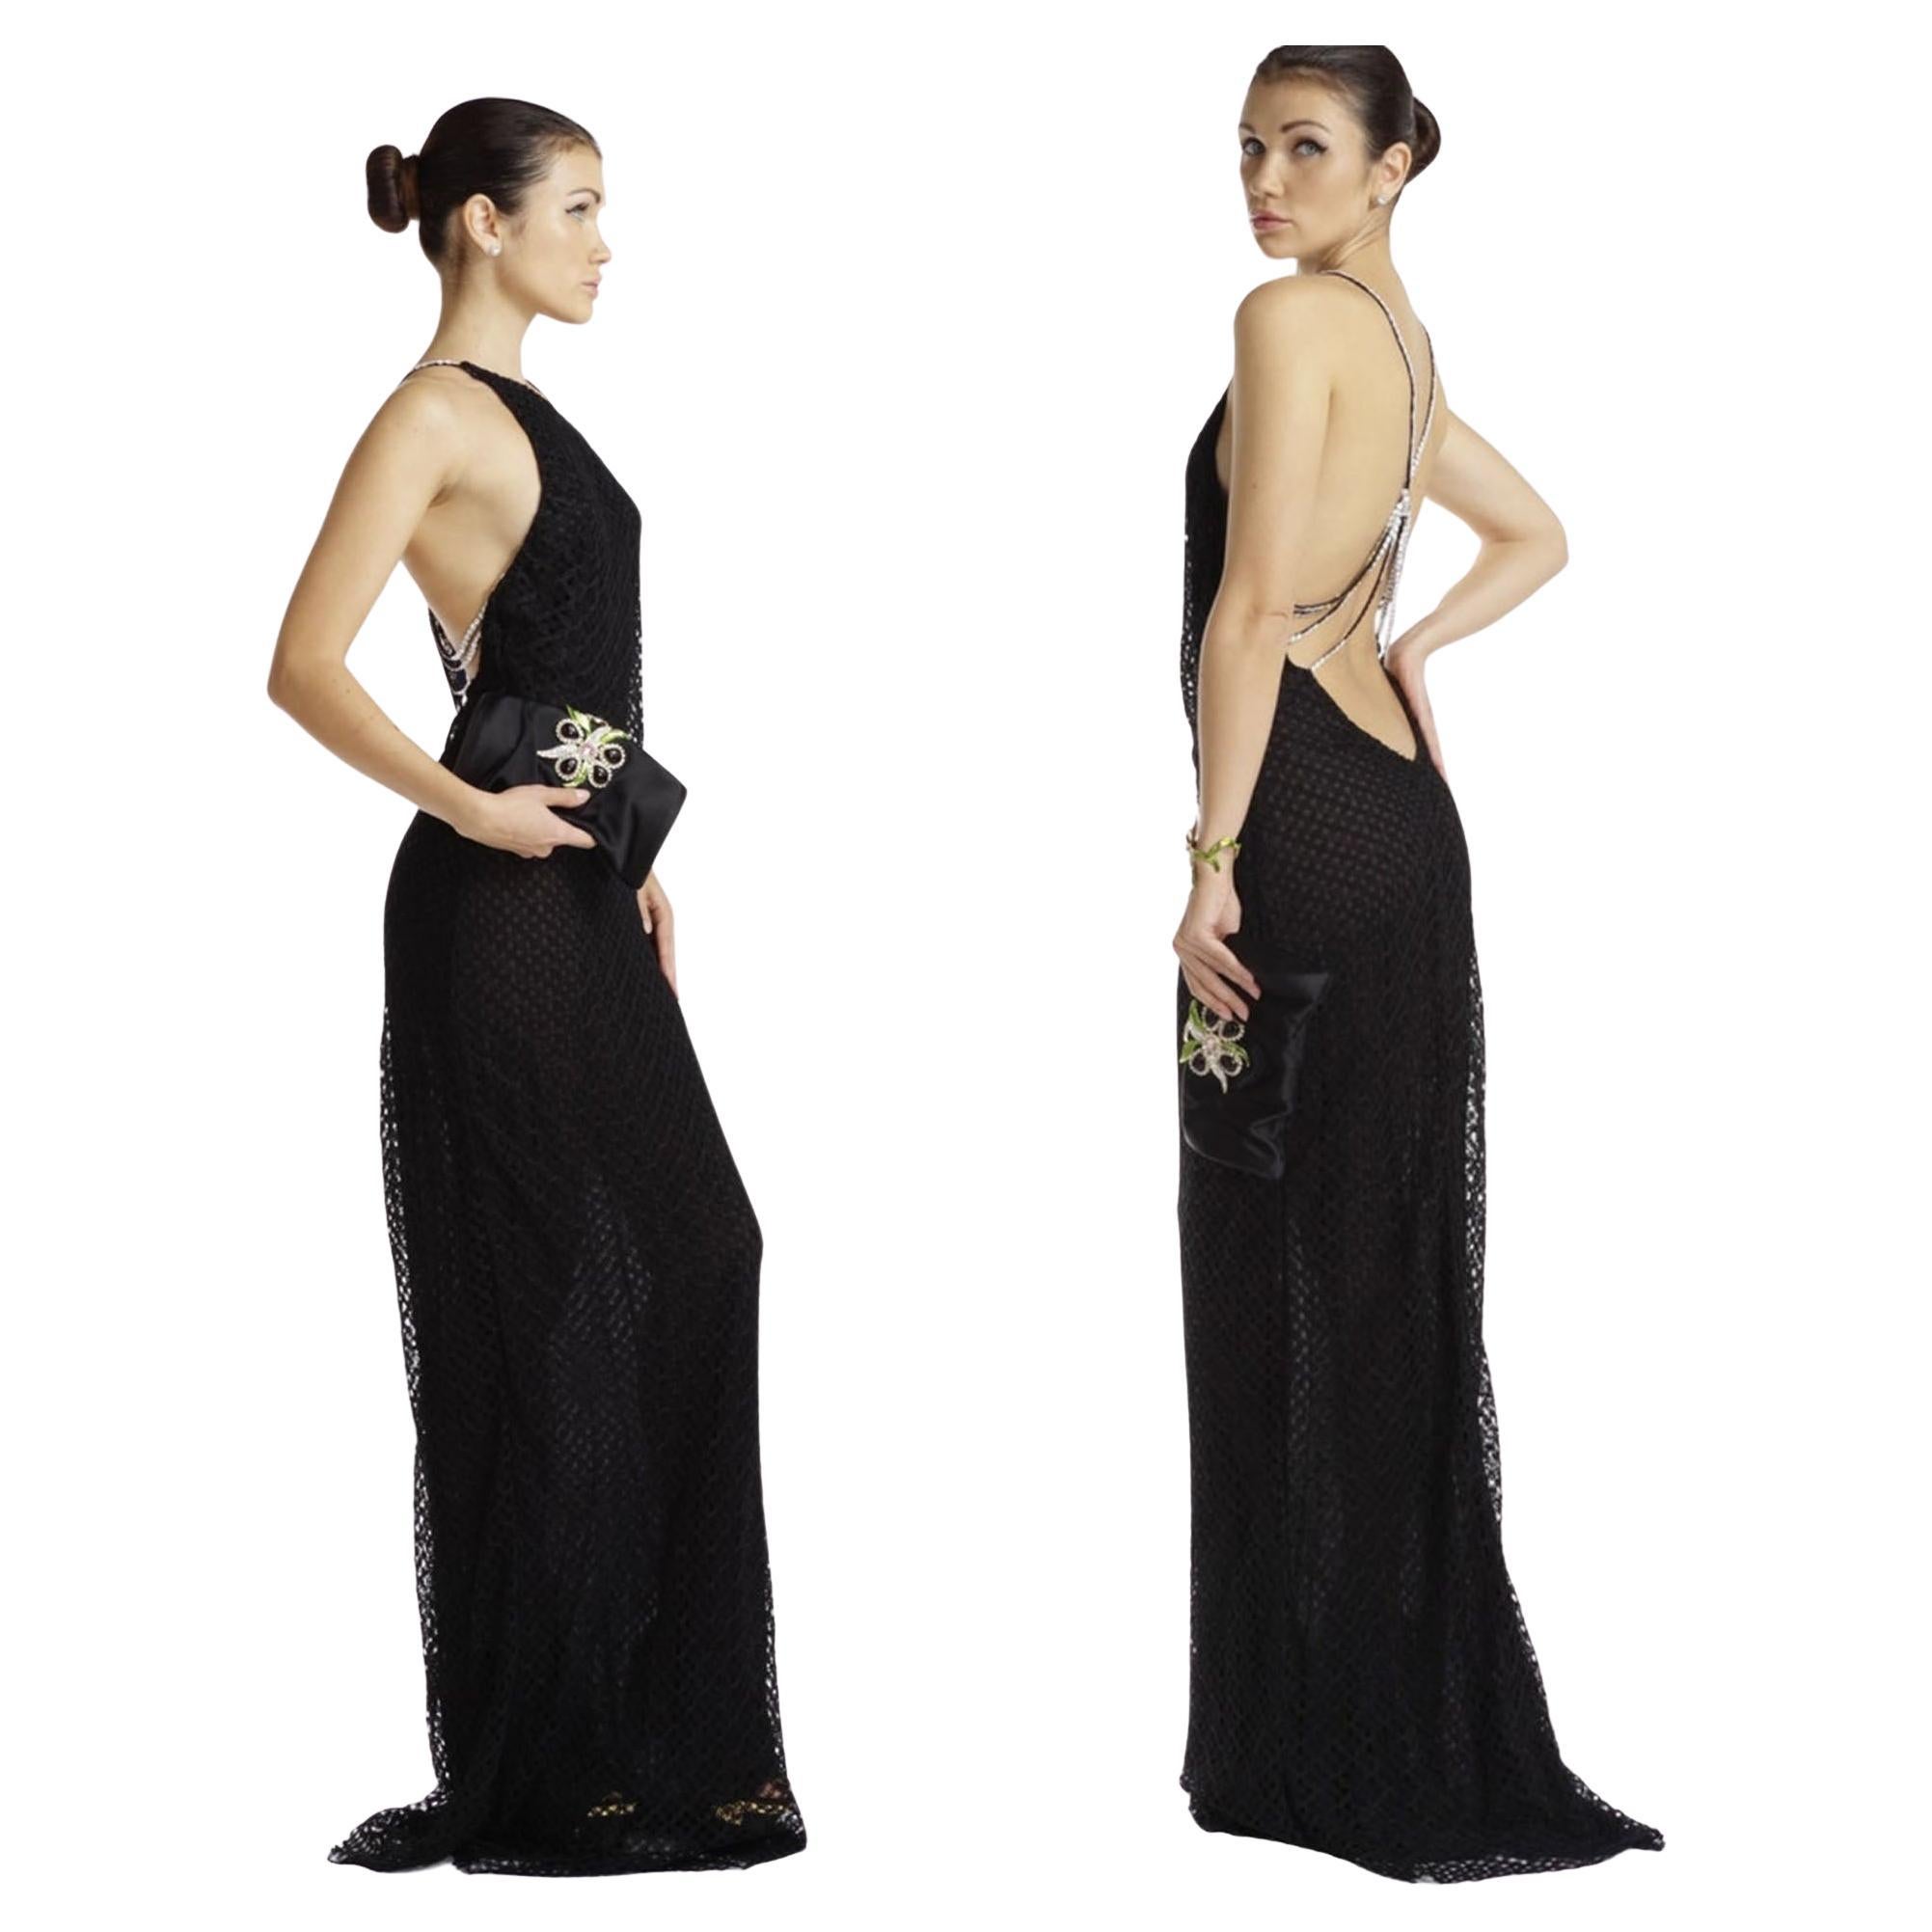 2002 Gianni Versace Couture Vintage Black Gown w/ Crystal Embellished Open Back For Sale